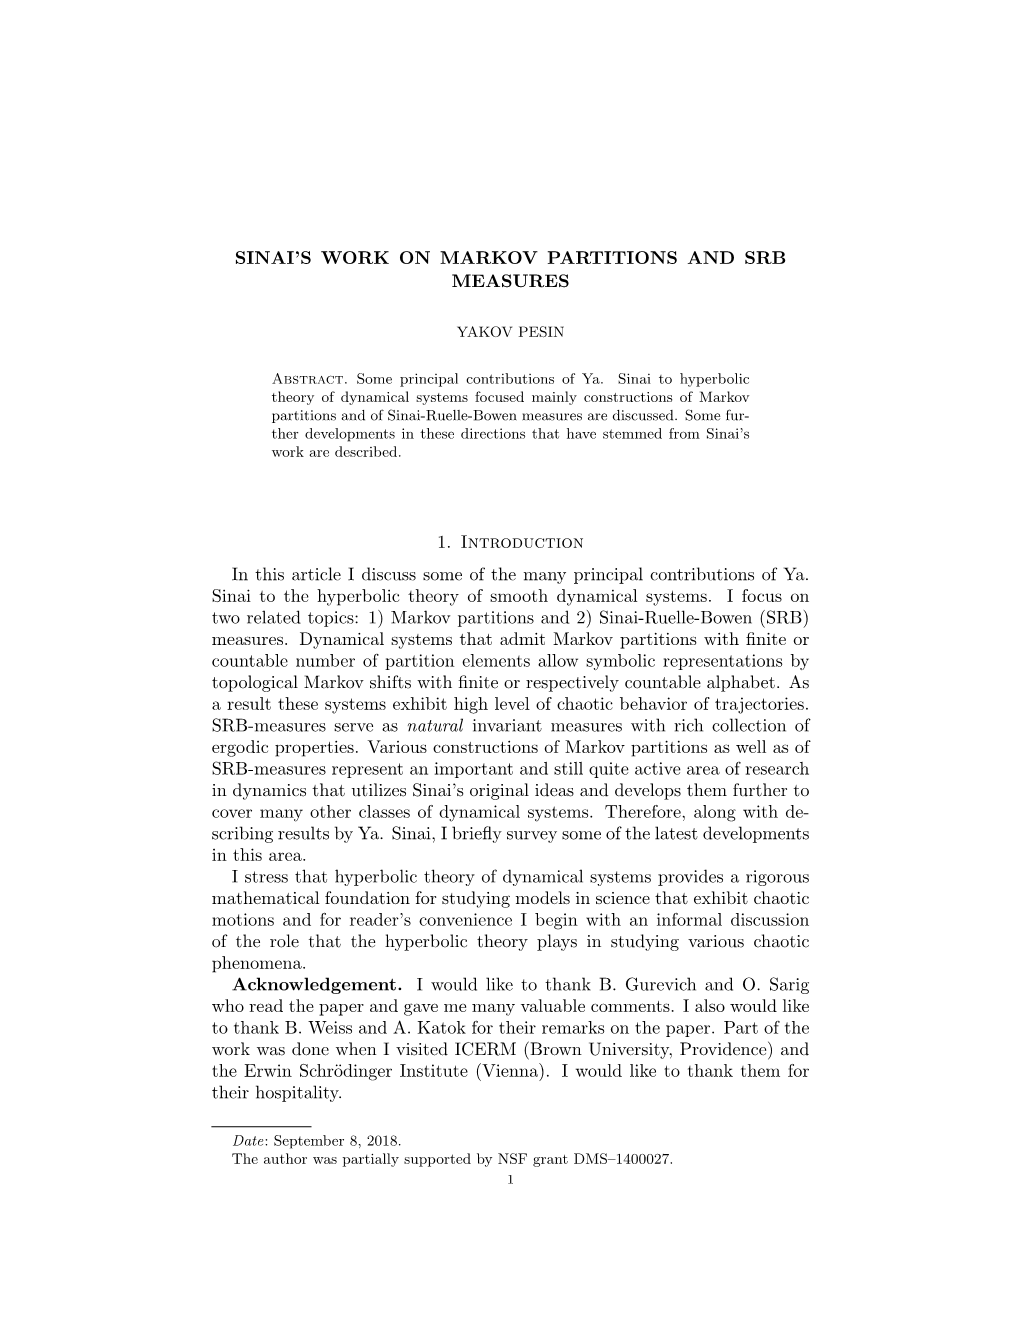 Sinai's Work on Markov Partitions and Srb Measures